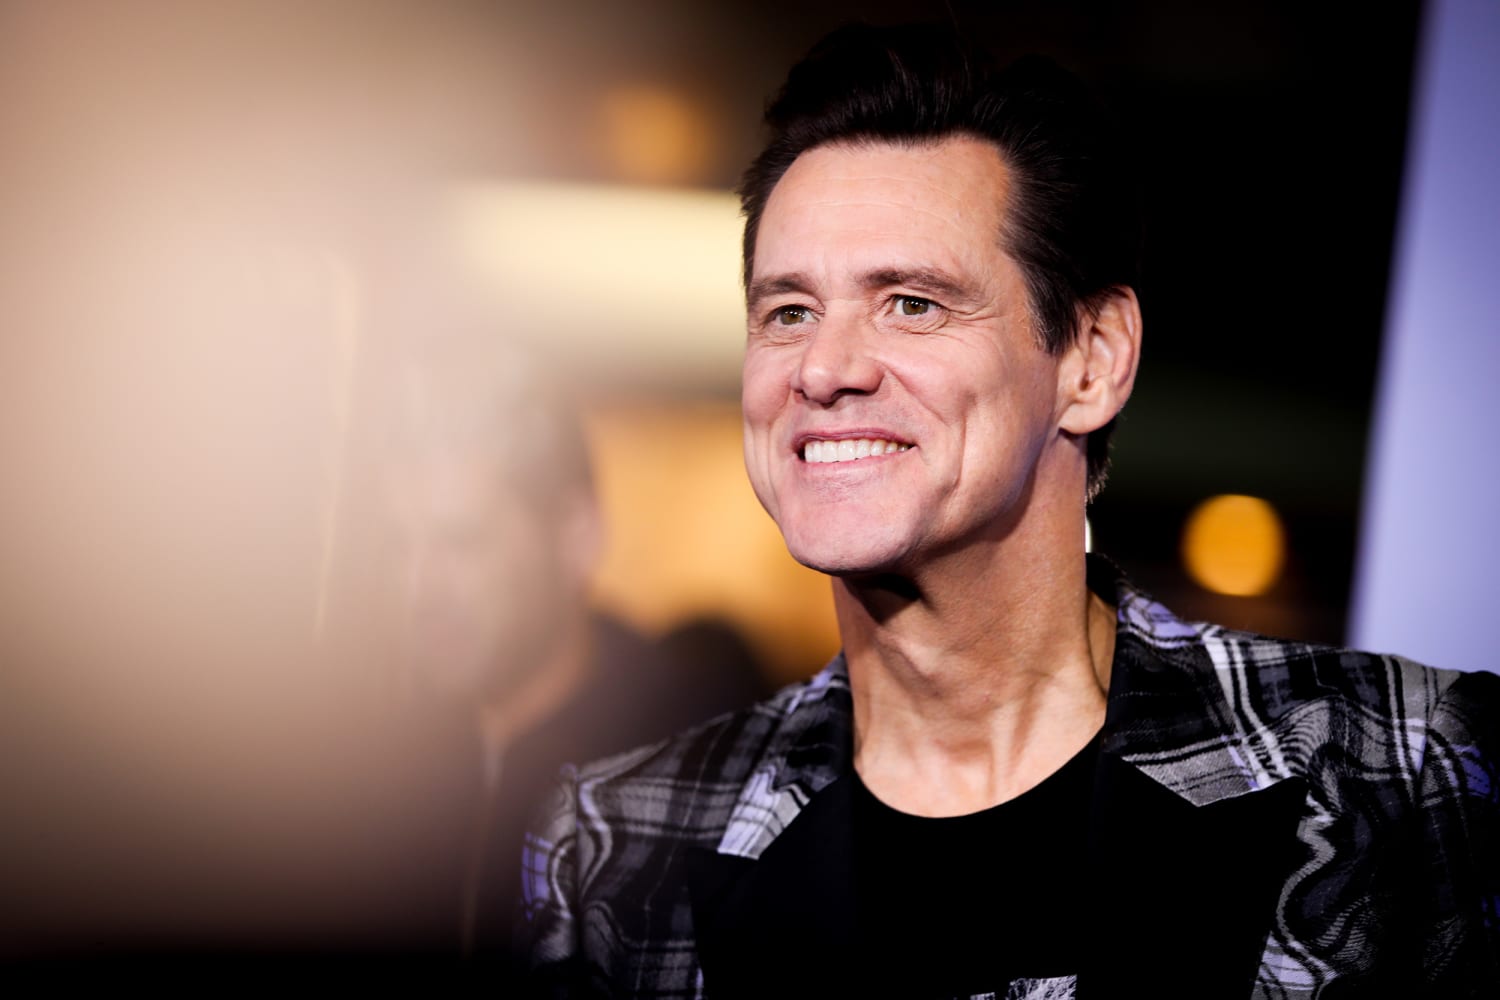 A Famous Actor Jim Carrey To Take Retirement After 40 Years Of Acting Career